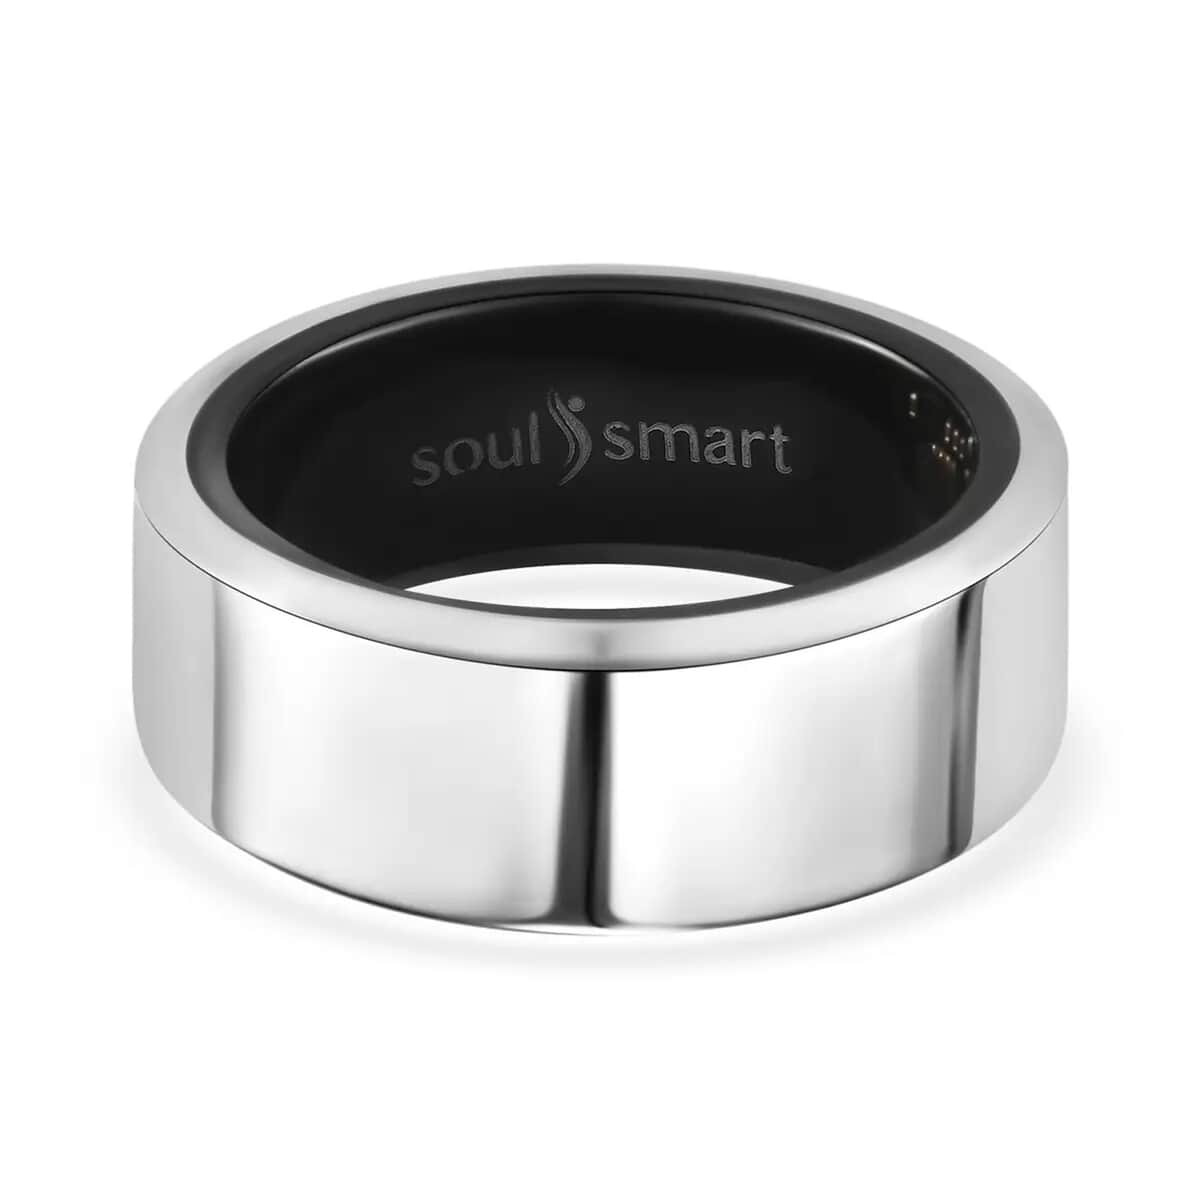 Soulsmart Multifunctional Health Tracker Smart Ring (Size 7.0) in Stainless Steel (Compatible with Android 5.0+ & Apple IOS 10.0+ Systems) image number 2